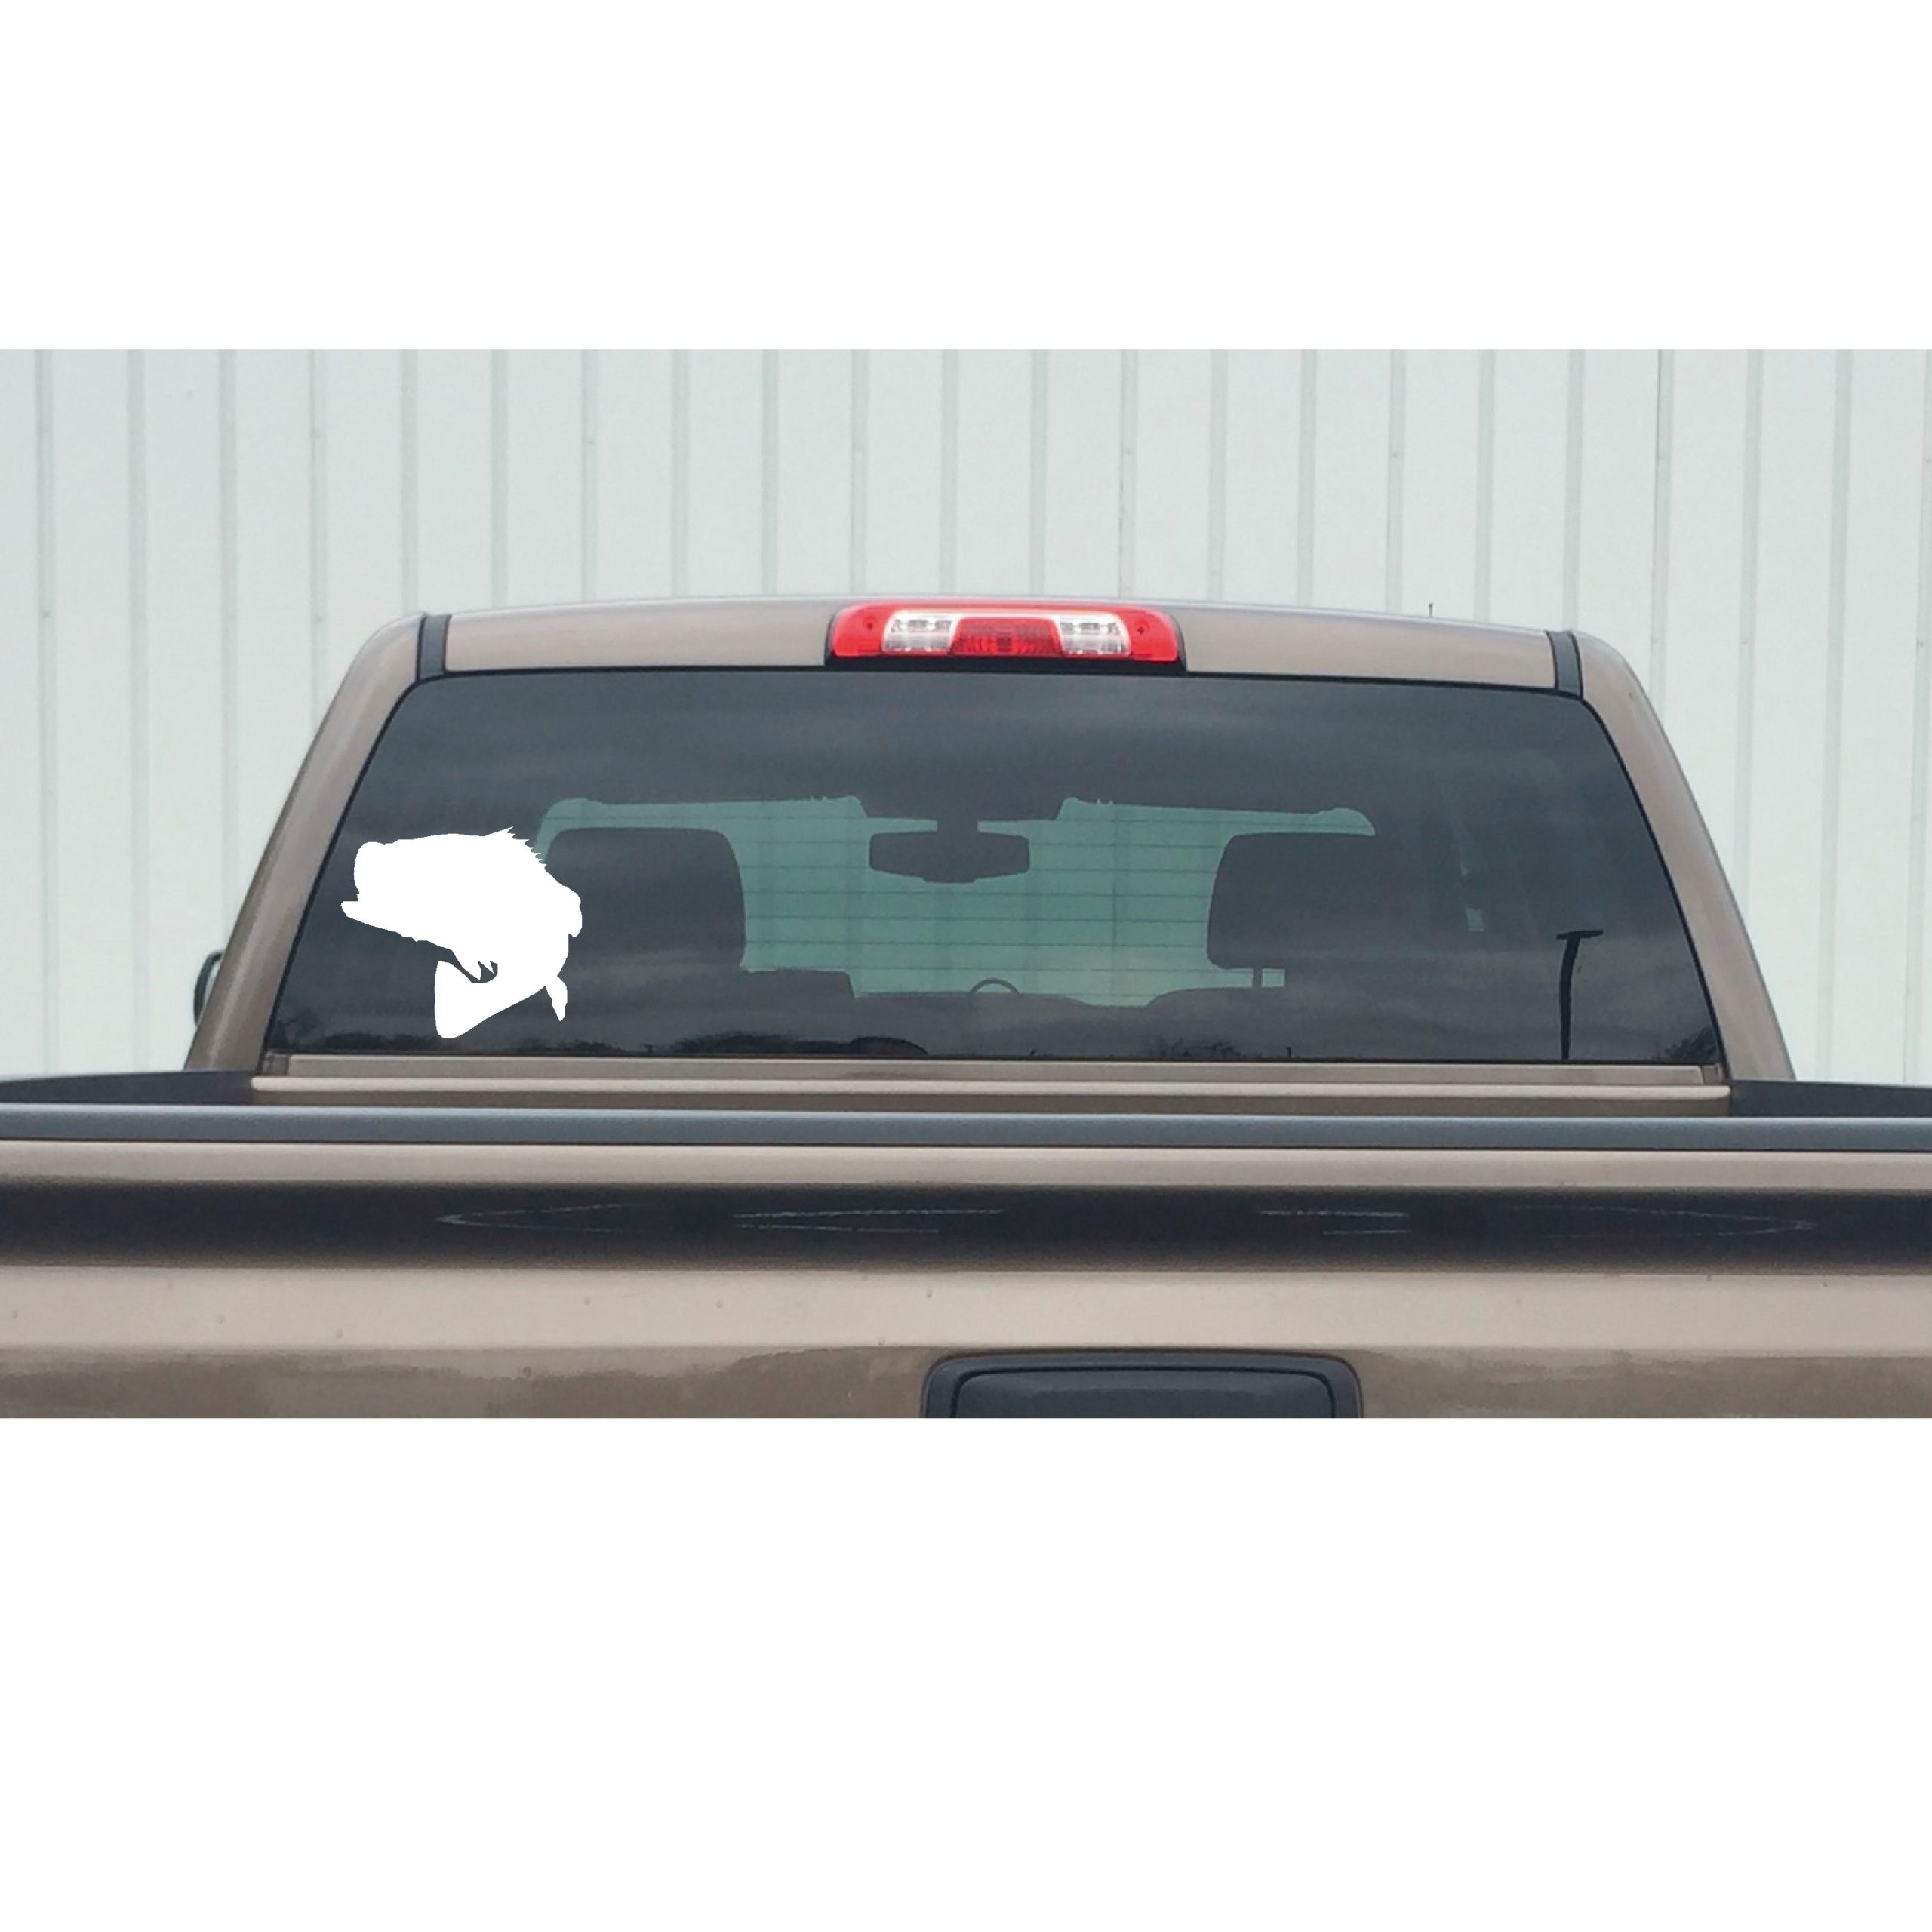 Large Mouth Bass Car Decal